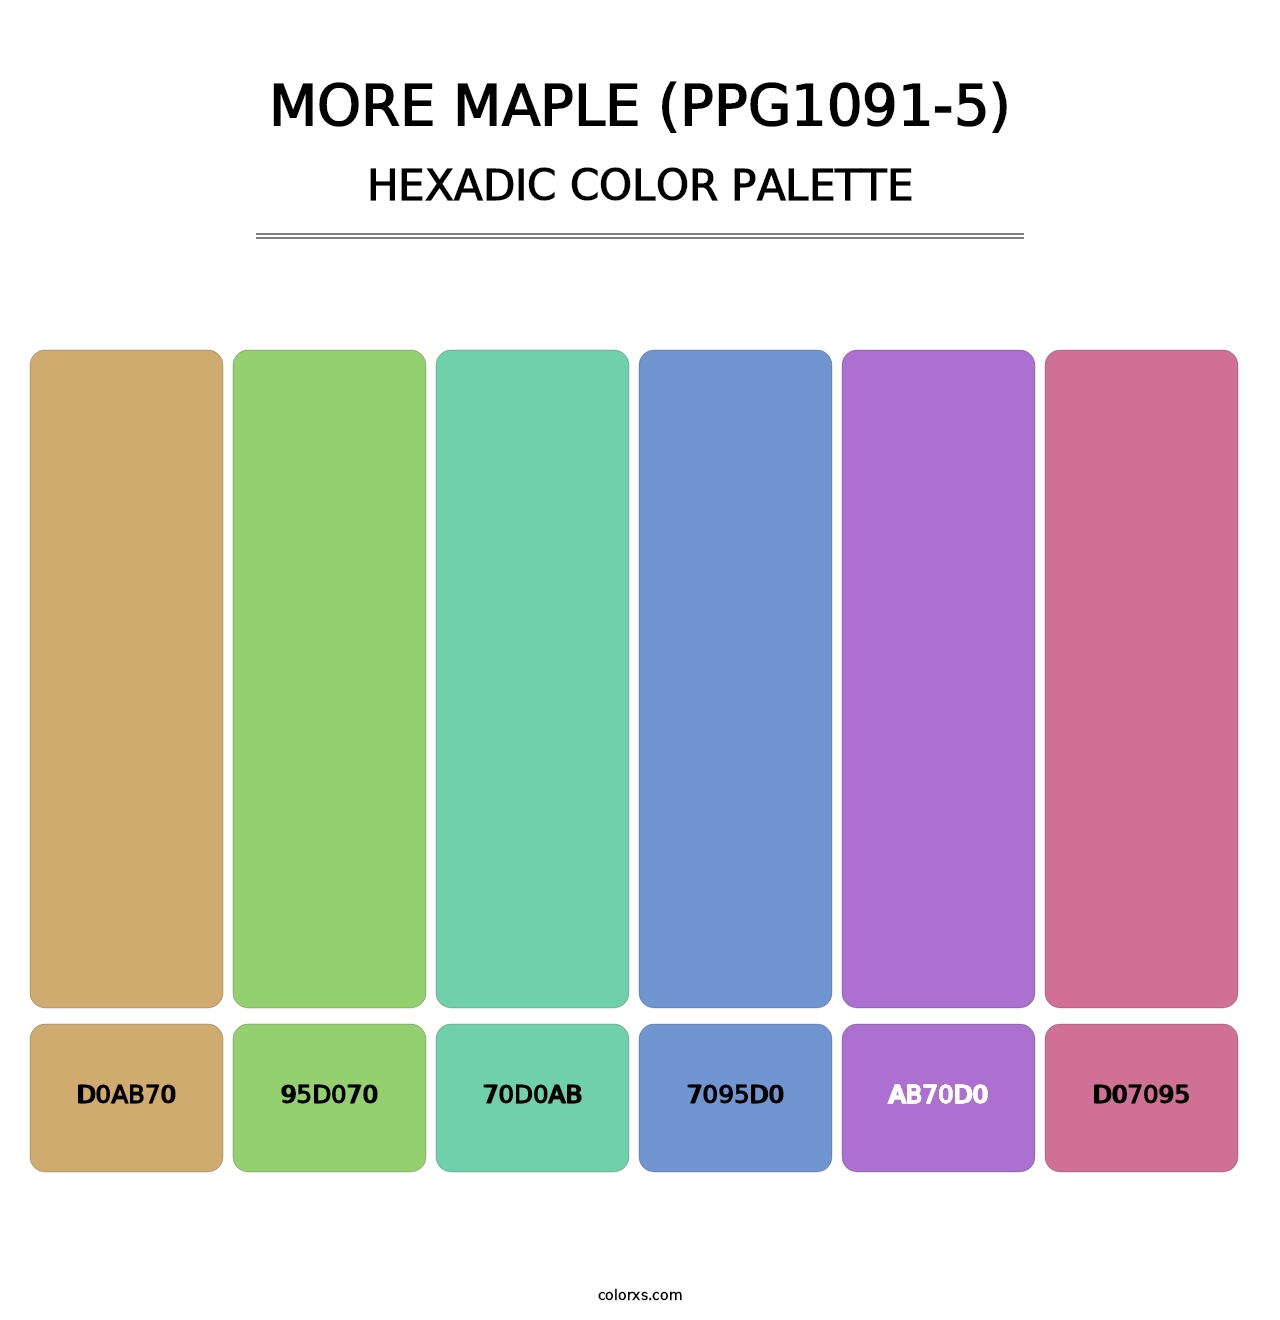 More Maple (PPG1091-5) - Hexadic Color Palette